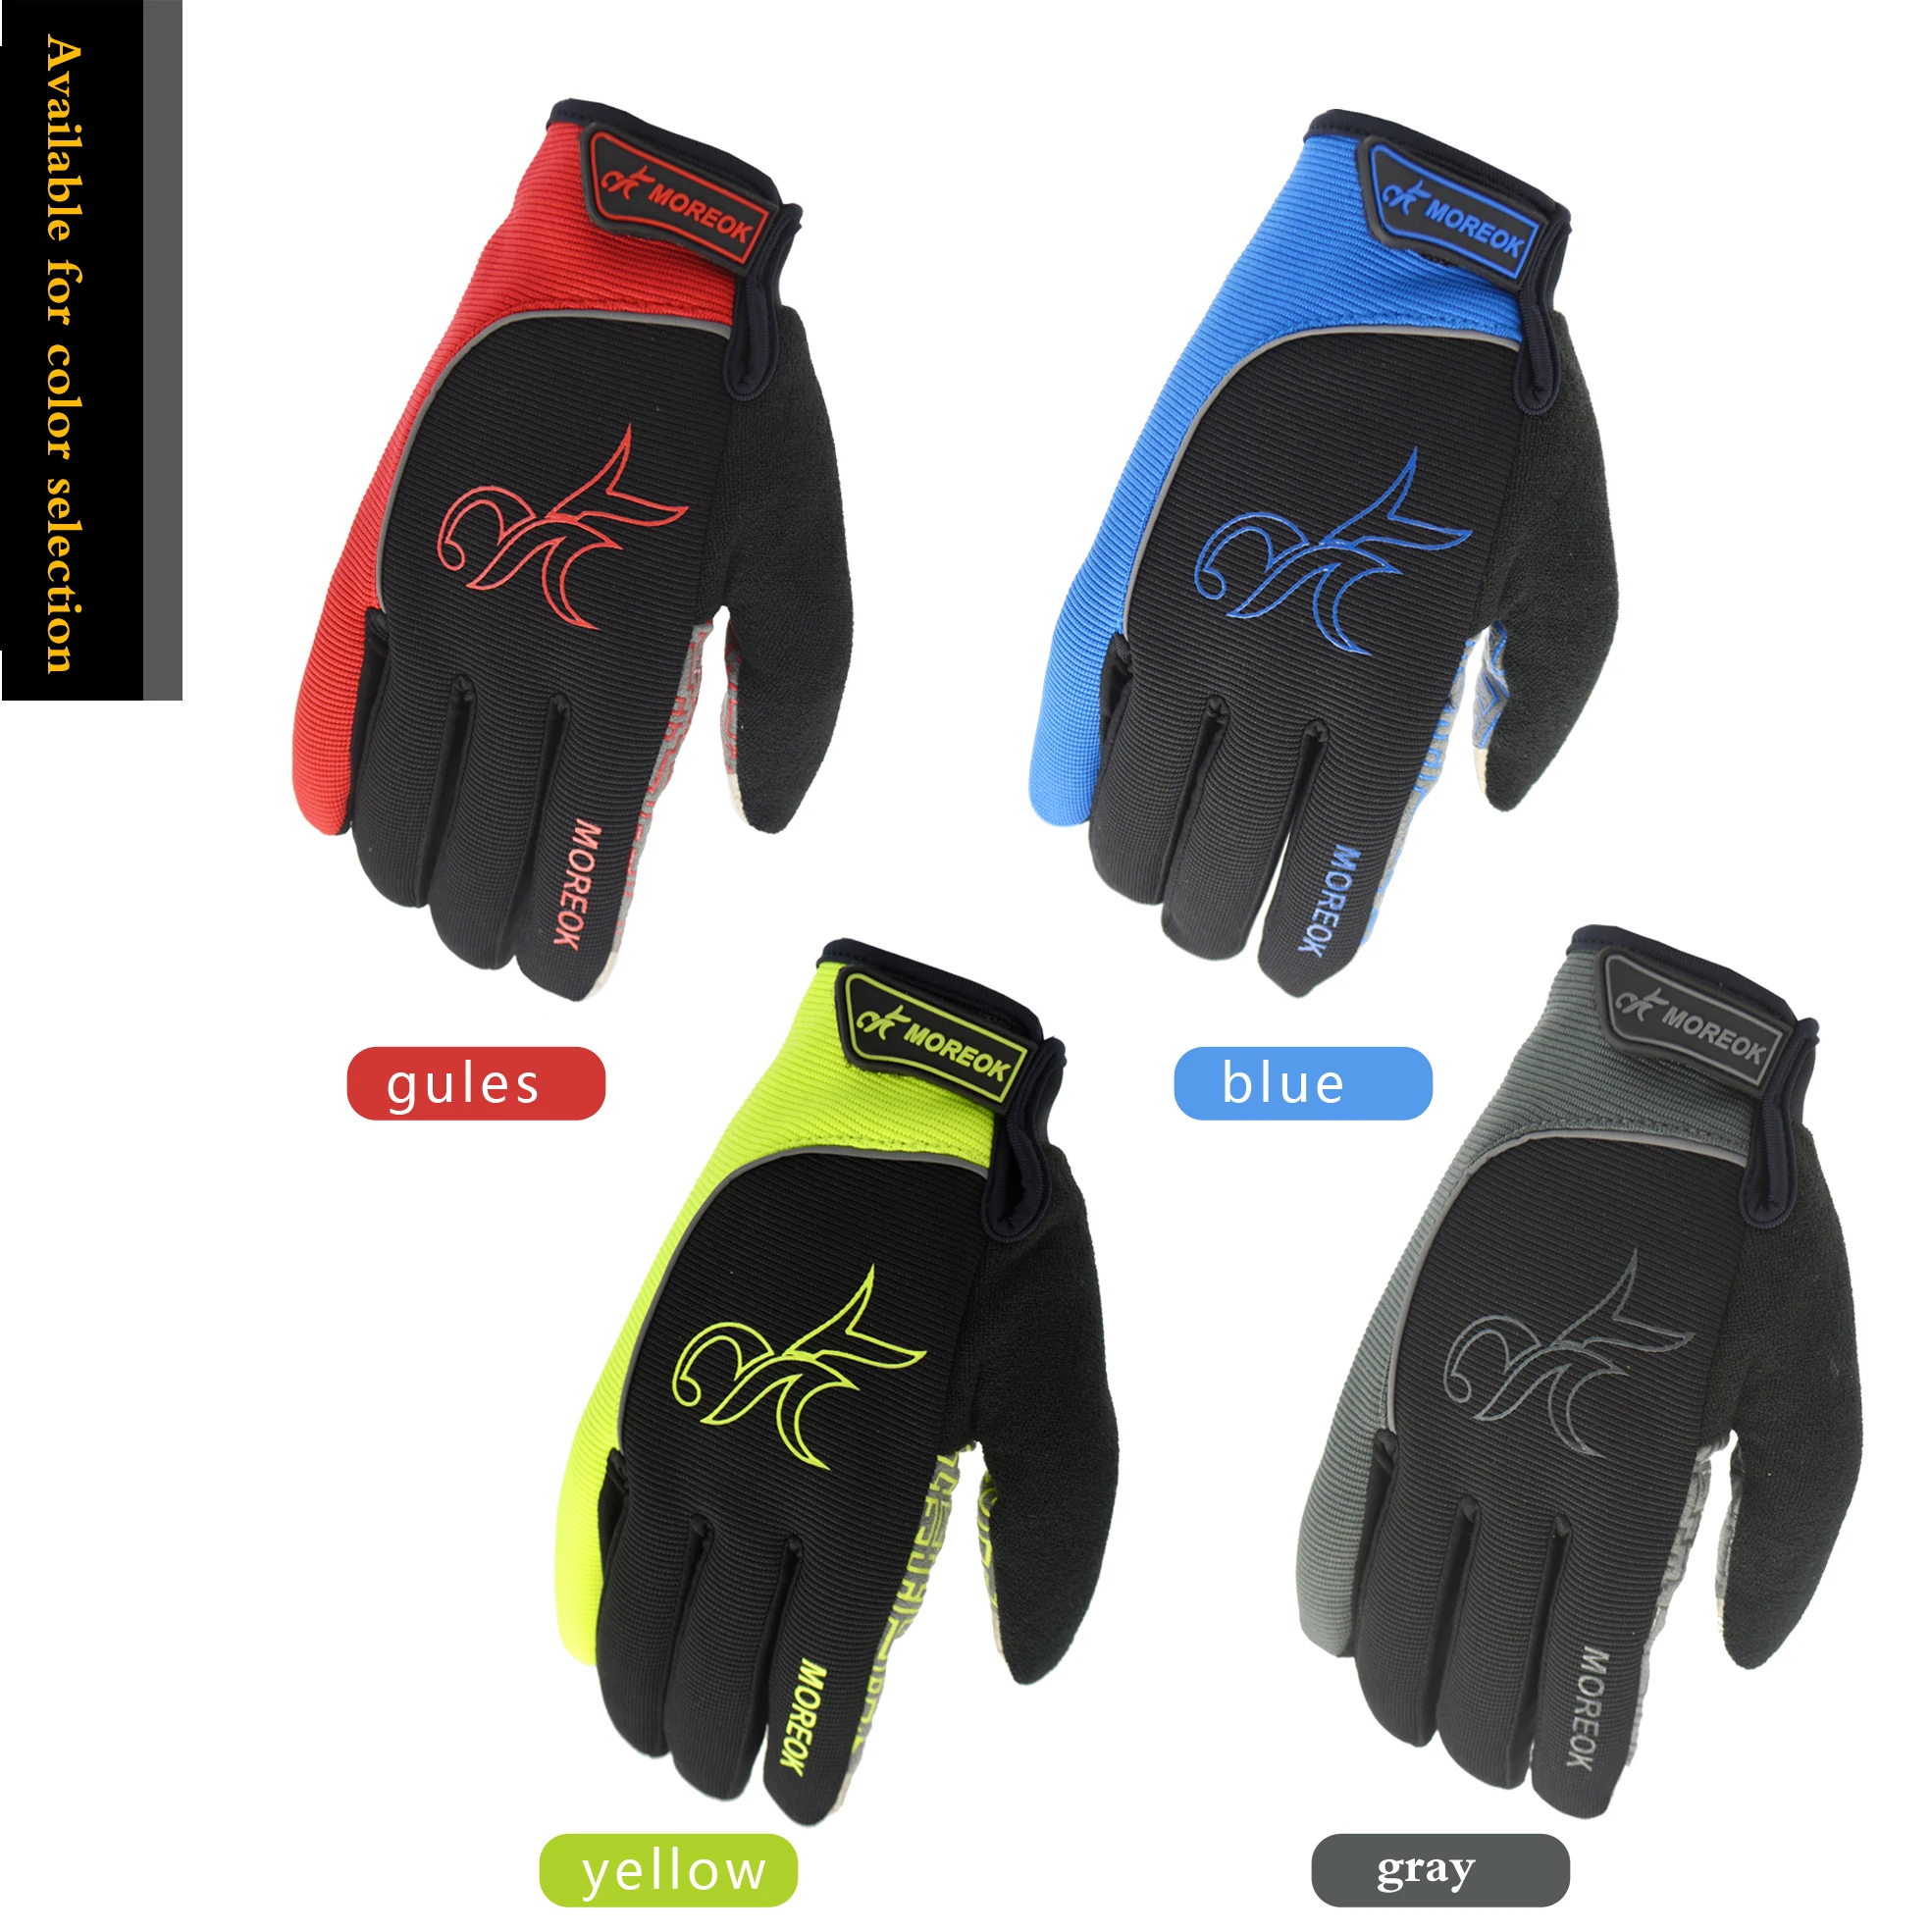 Moreok Specialized Full Finger Cycling Gloves Comfortable Motorcycle